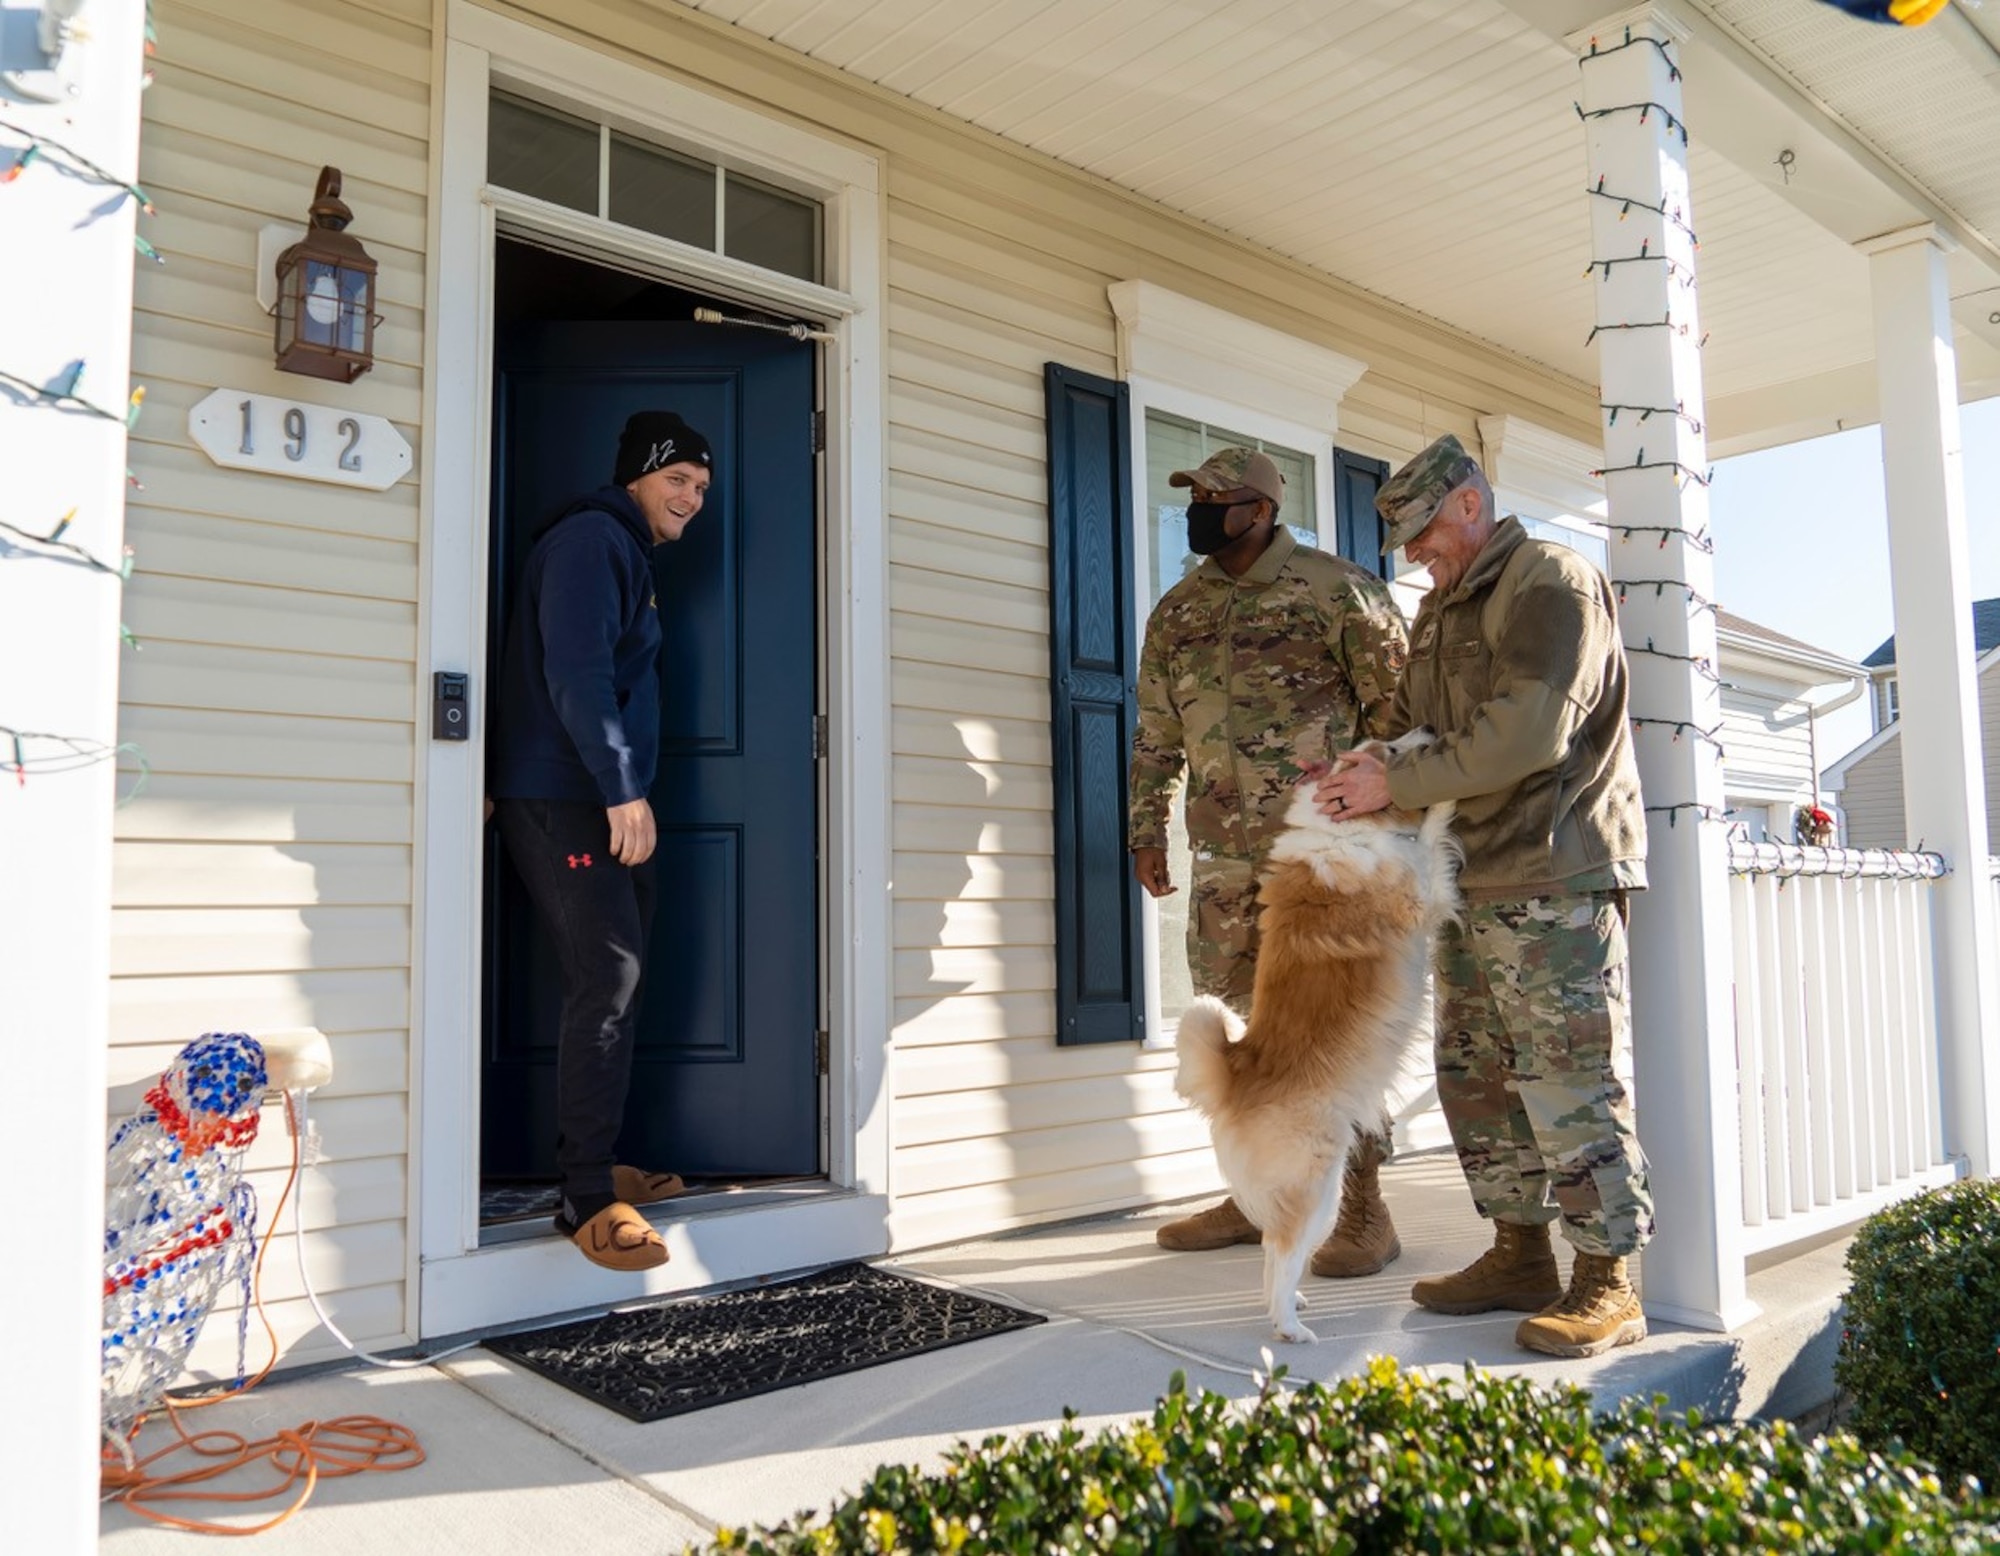 Col. Chip Hollinger, (right) Air Force Mortuary Affairs Operations commander and Chief Master Sgt. Bobby Drayton, AFMAO senior enlisted leader, surprise Staff Sgt. Jacob Jones, AFMAO unit deployment manager, at his home Dec. 23, 2021, to notify him of his selection for promotion under the Stripes of Exceptional Performers program. Jones was promoted to the rank of Tech. Sgt., effective Dec. 10, 2021. (U.S. Air Force photo by Jason Minto)